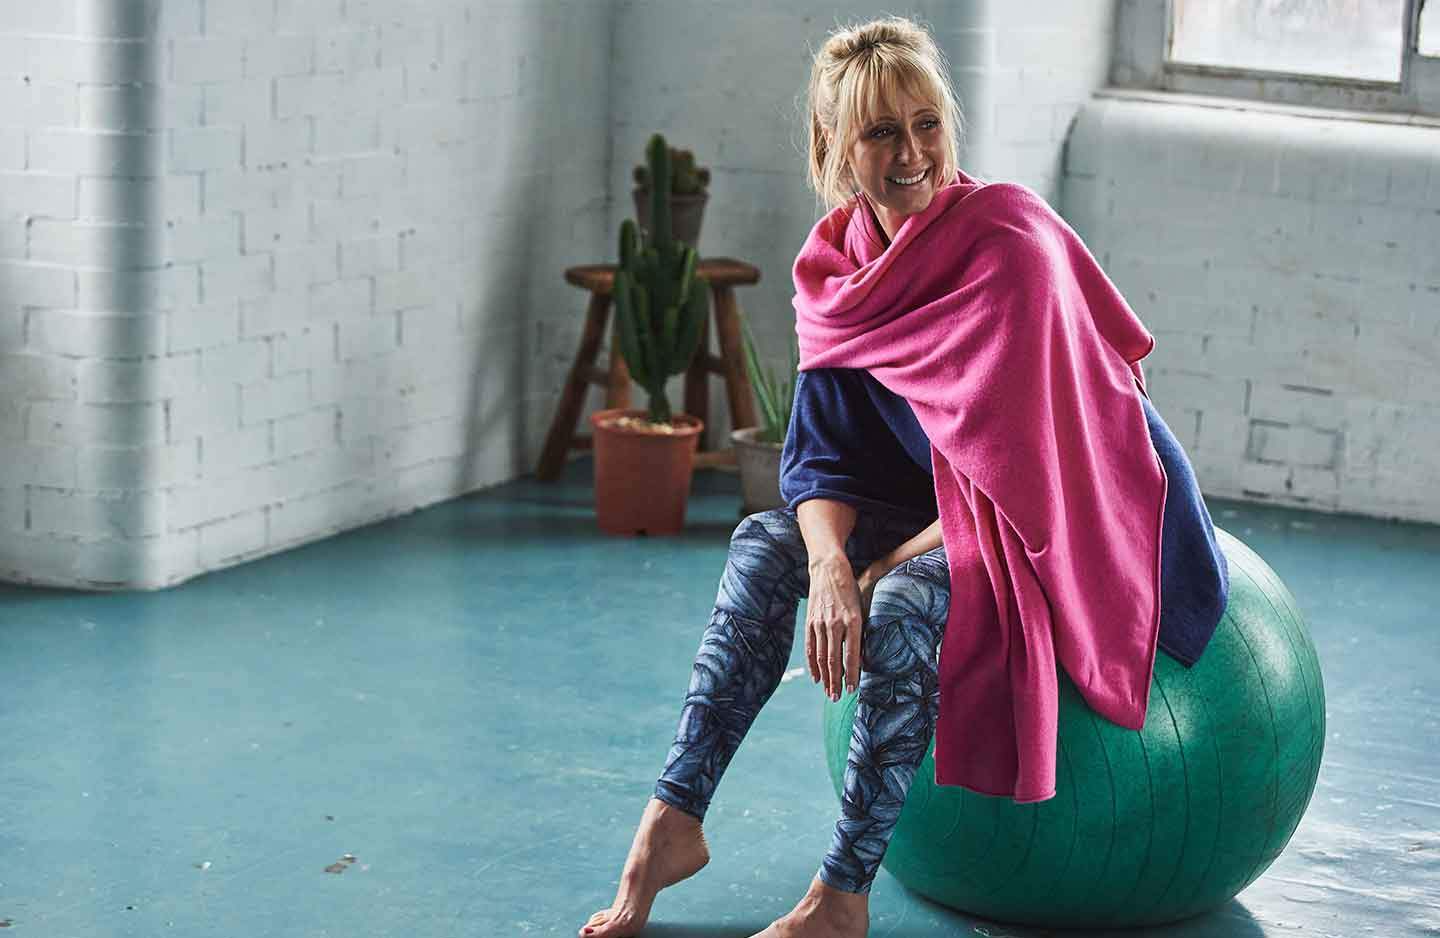 Women sat on green yoga ball in blue sportswear with a blue cashmere poncho layered over the top with a pink cashmere wrap wrapped around shoulders in building with white brick wall and windows with cactus and wooden stool in the corner 